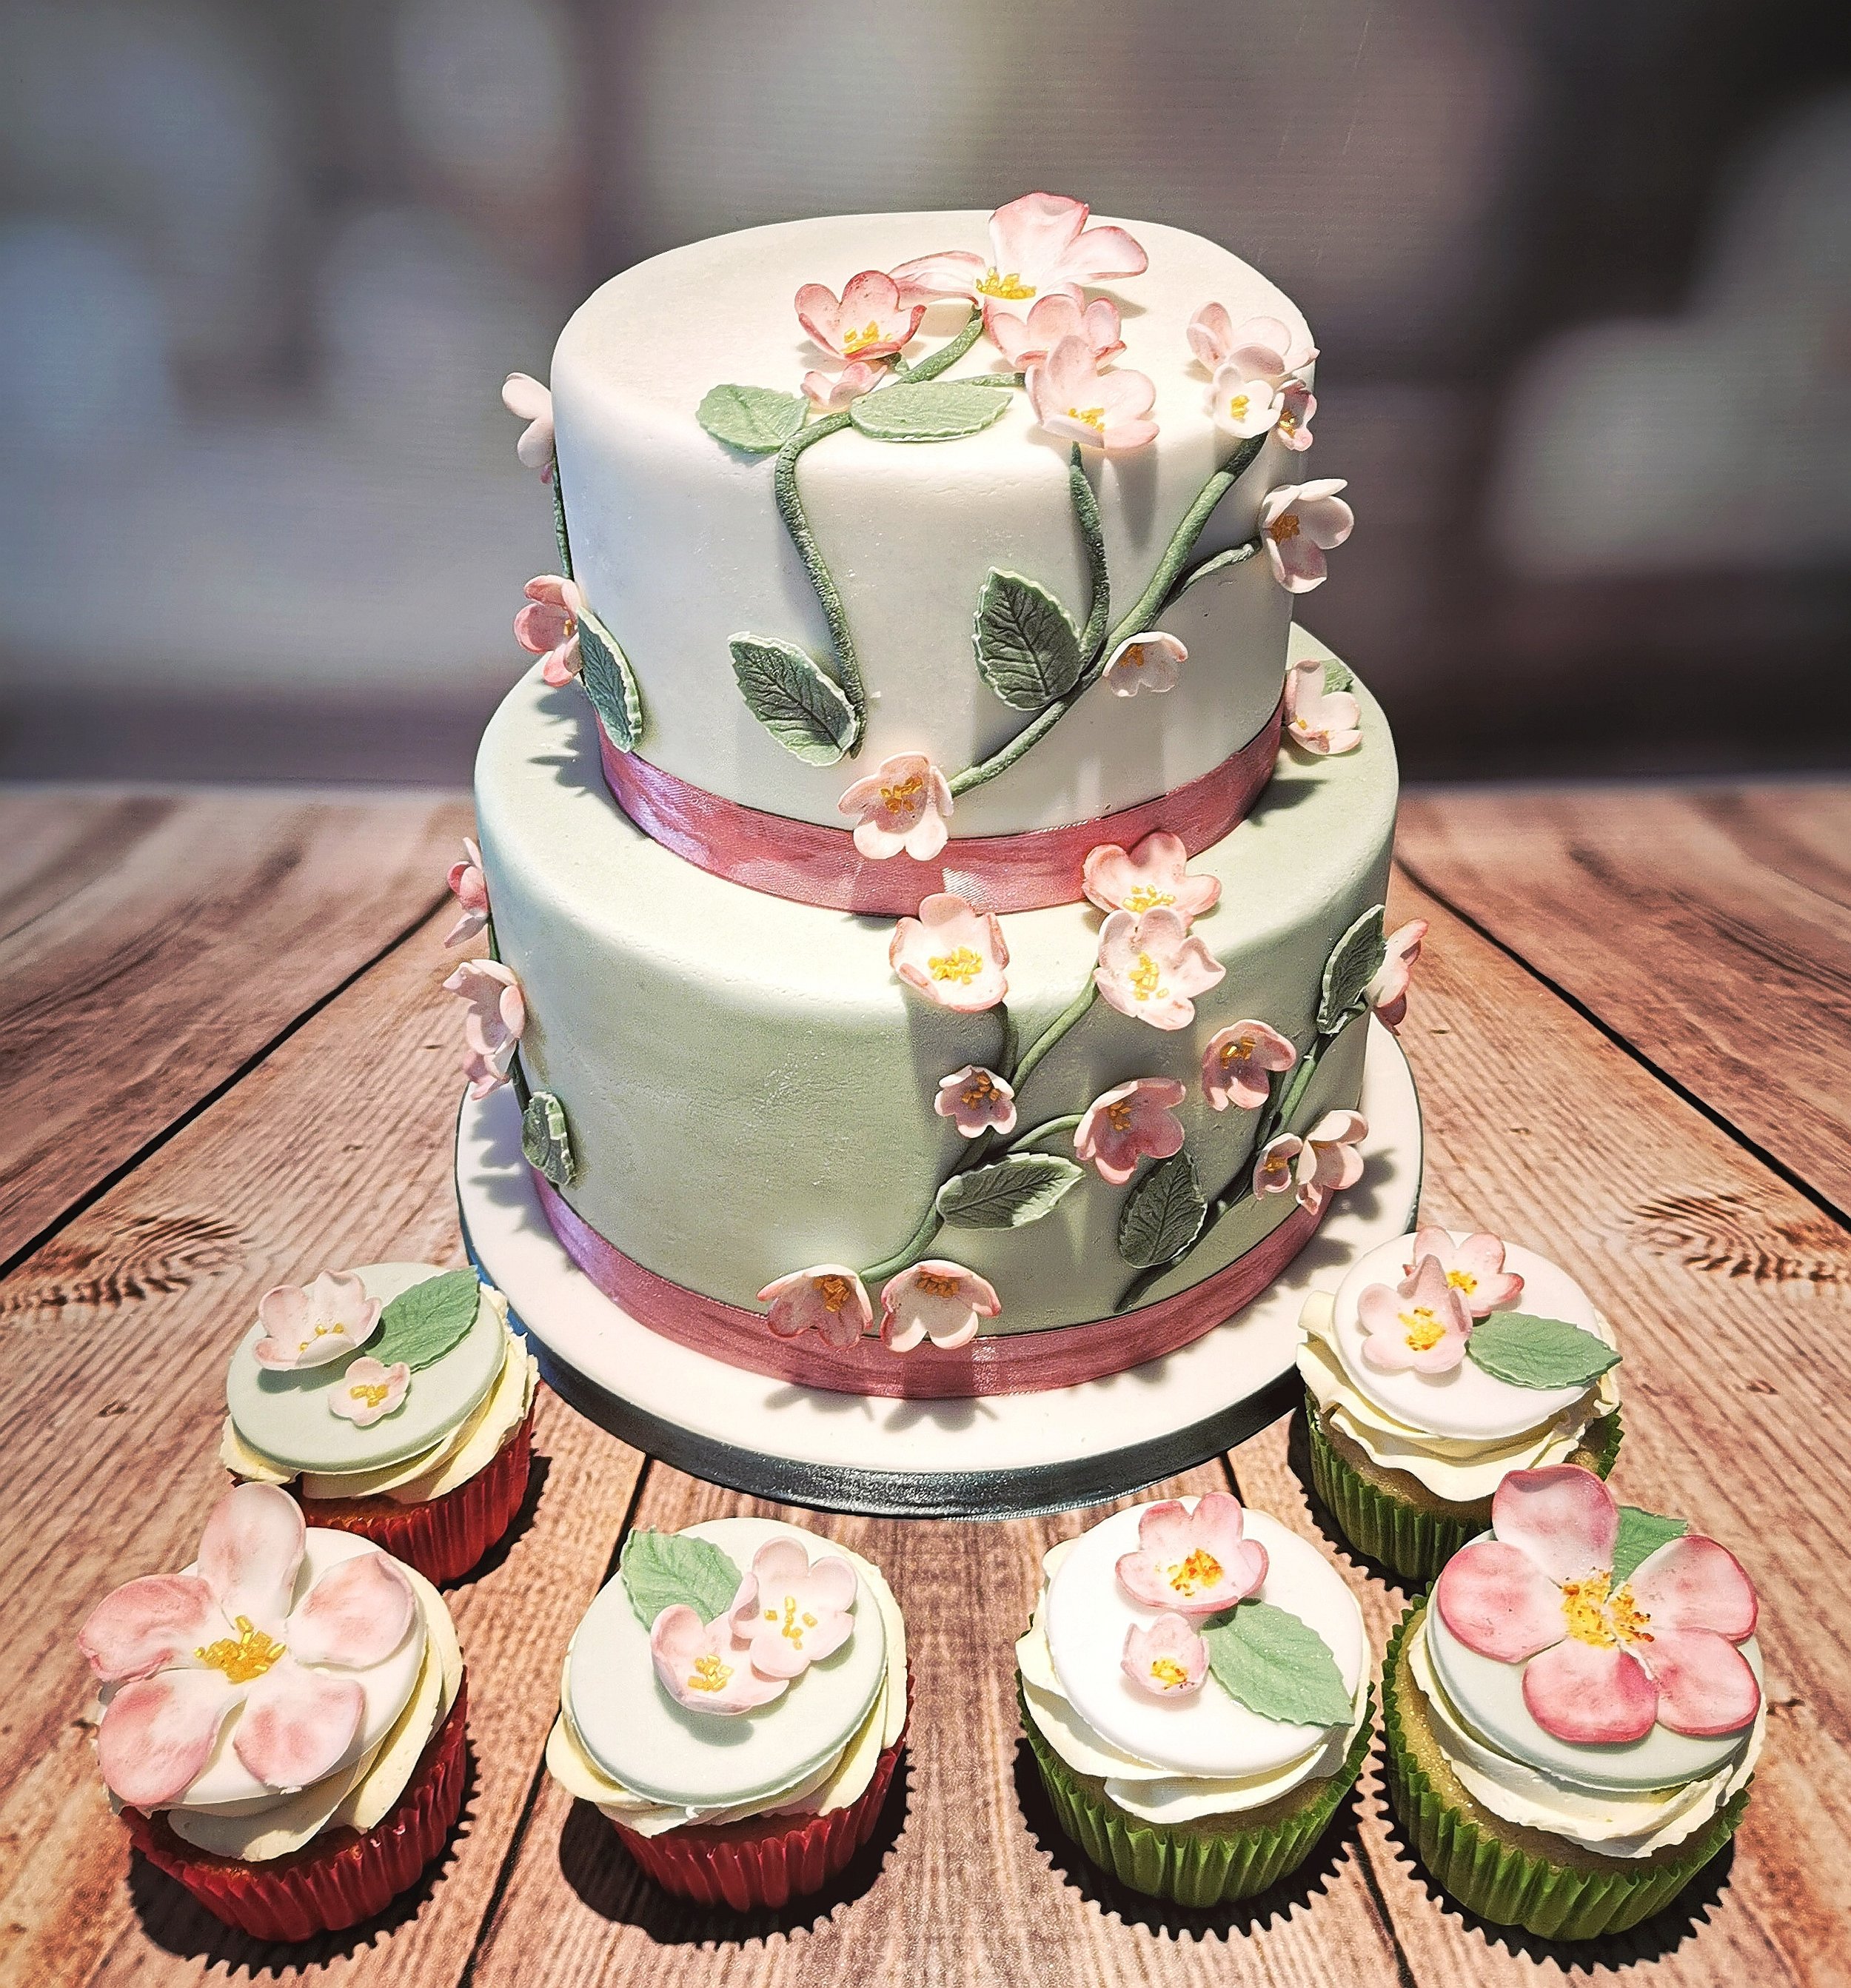 Christening cake decorated with briar roses